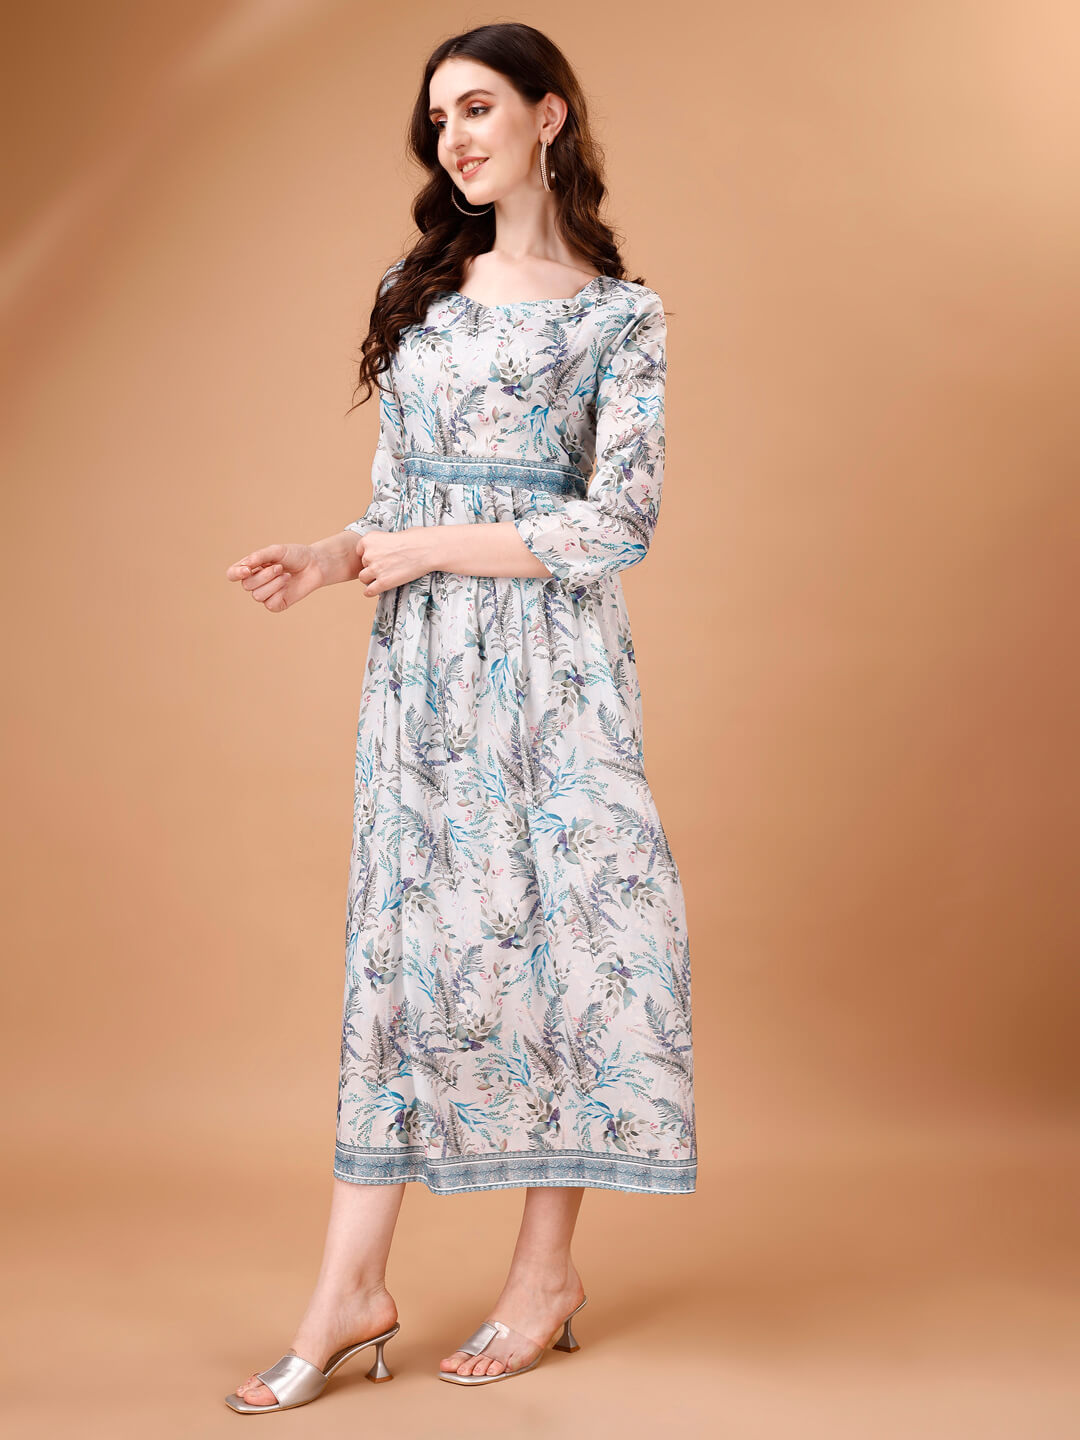 Blooming Elegance: Floral Printed Maxi Dress in Luxuriously Soft Fabric - thevendorvilla